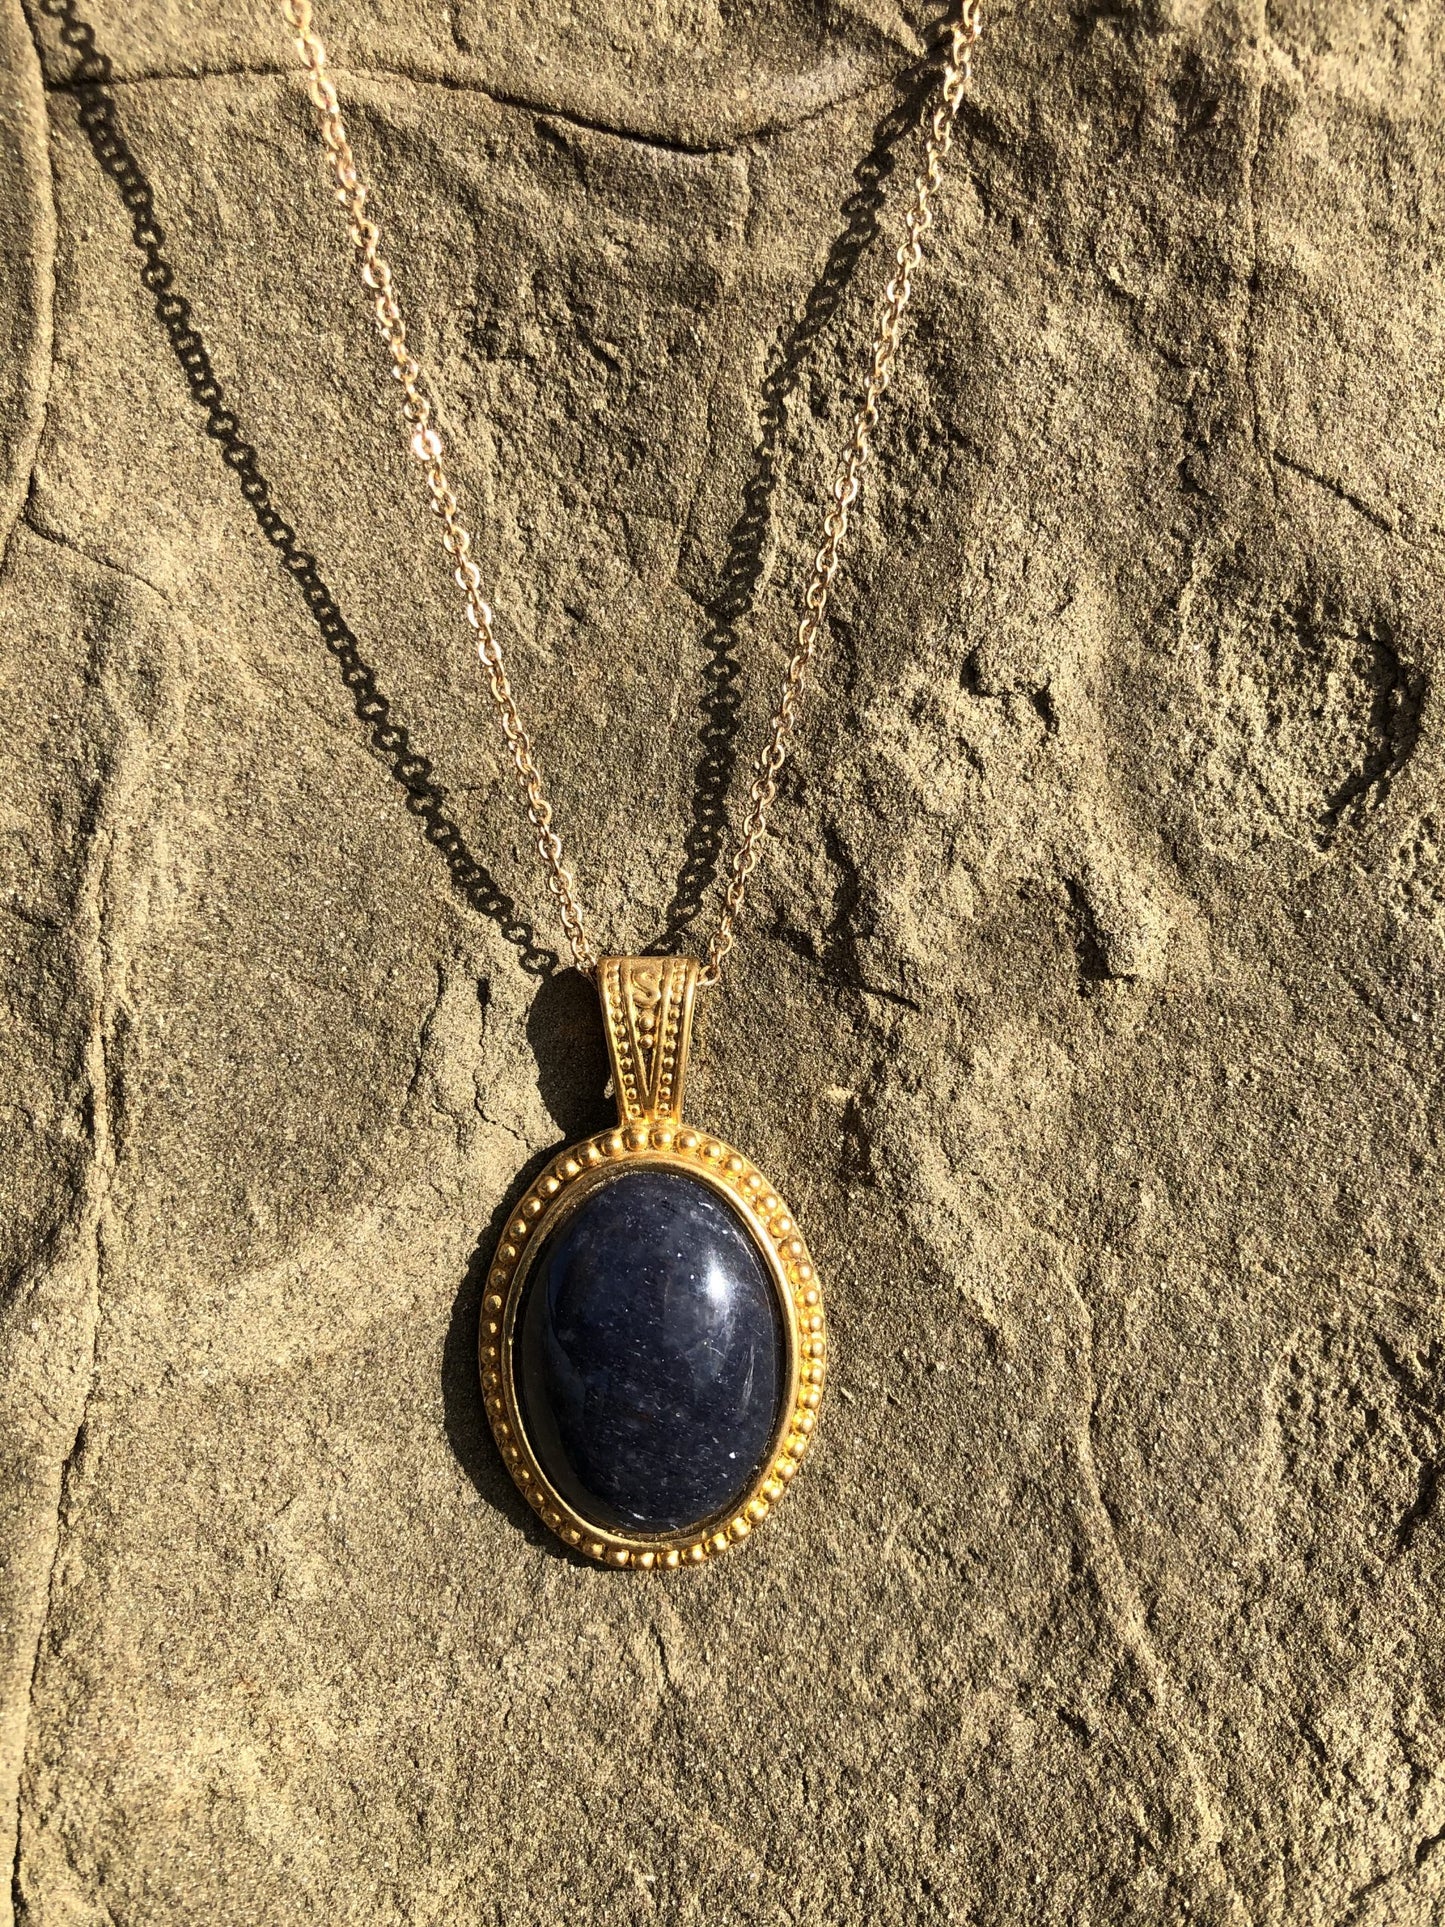 Necklace with natural blue aventurine, hand polished to a 25x18mm cabochon and set in a gold plated setting with 19 inch chain, on rock